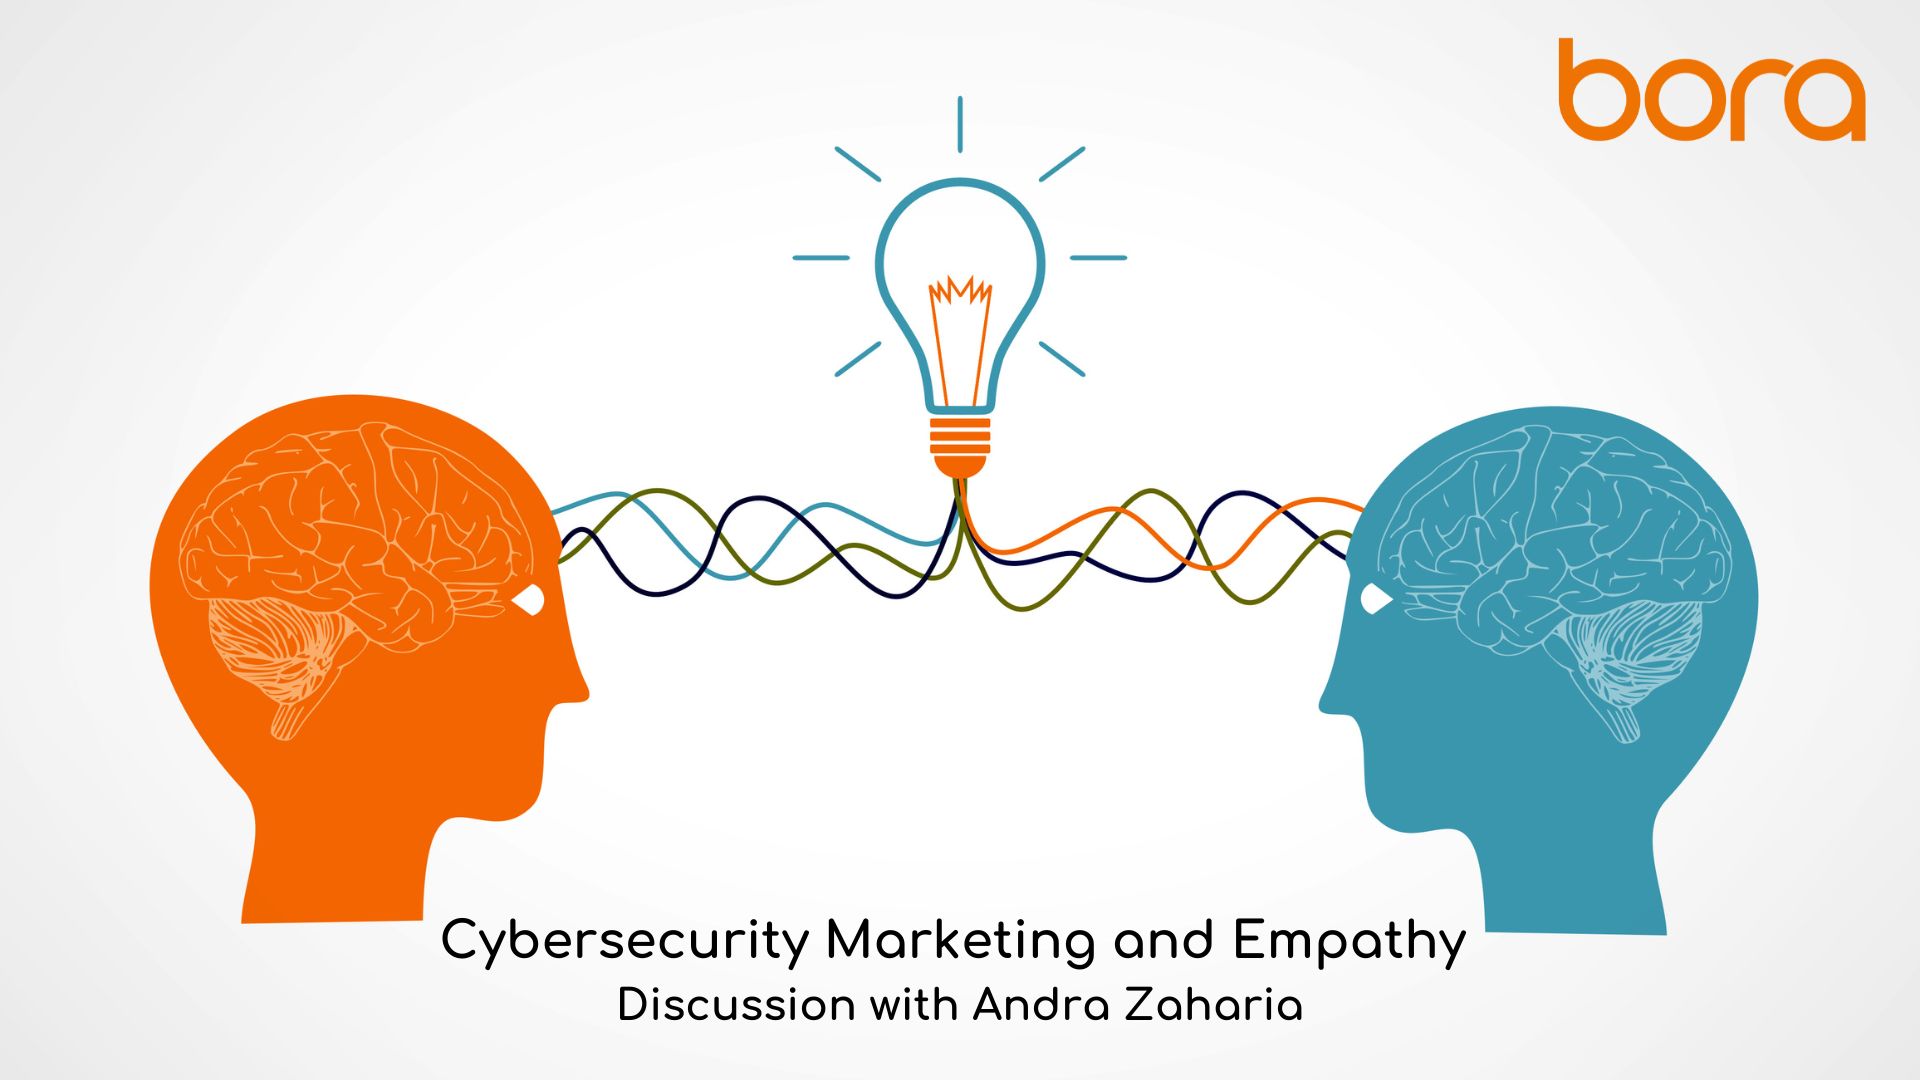 Cybersecurity Marketing and Empathy – a discussion with Andra Zaharia